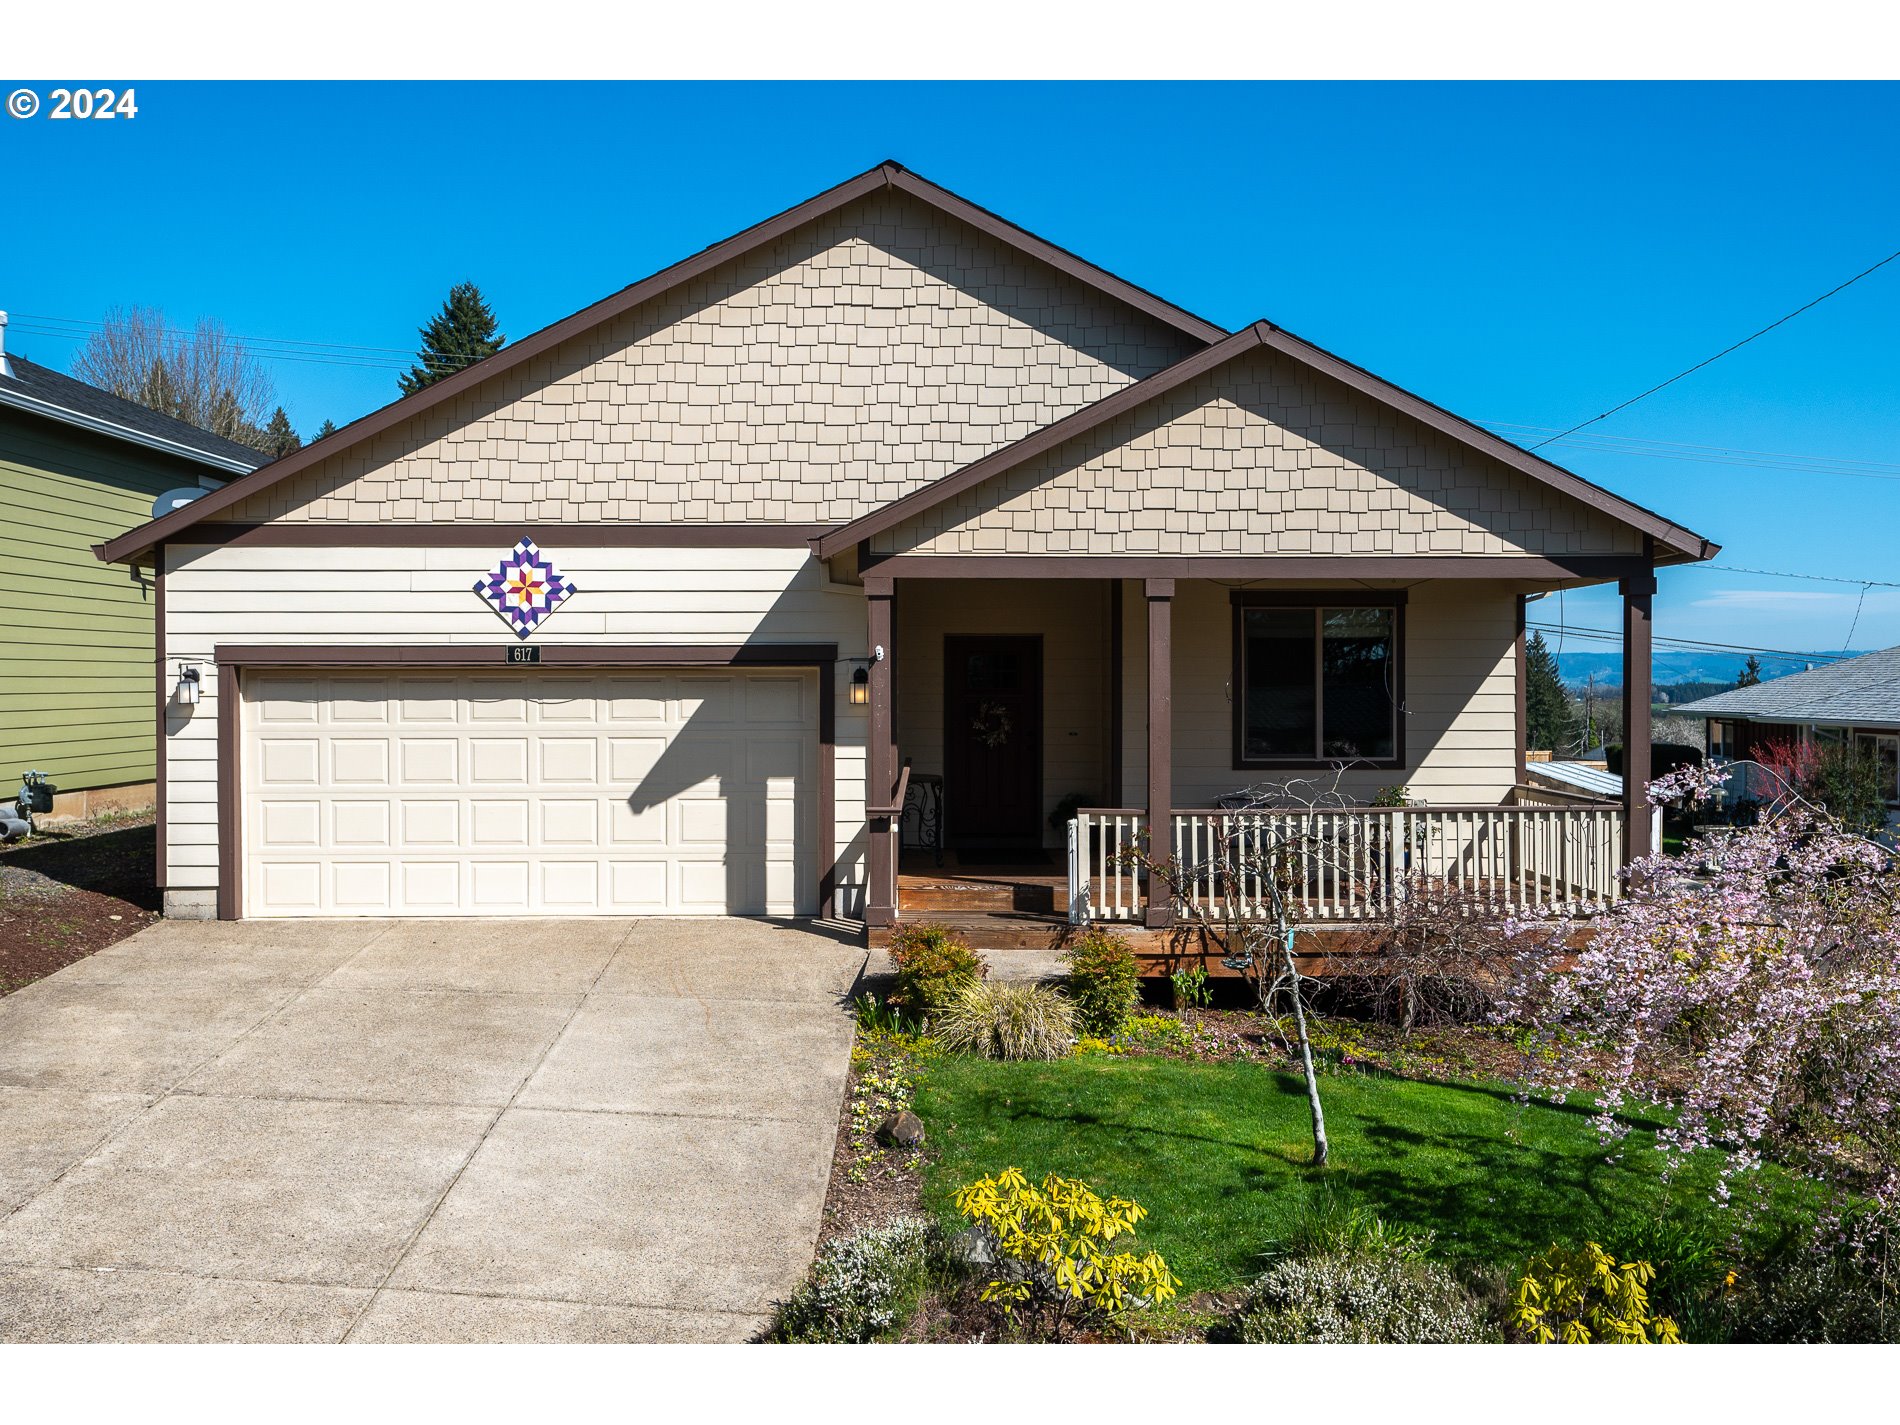 617 SKY LN, Forest Grove, OR 